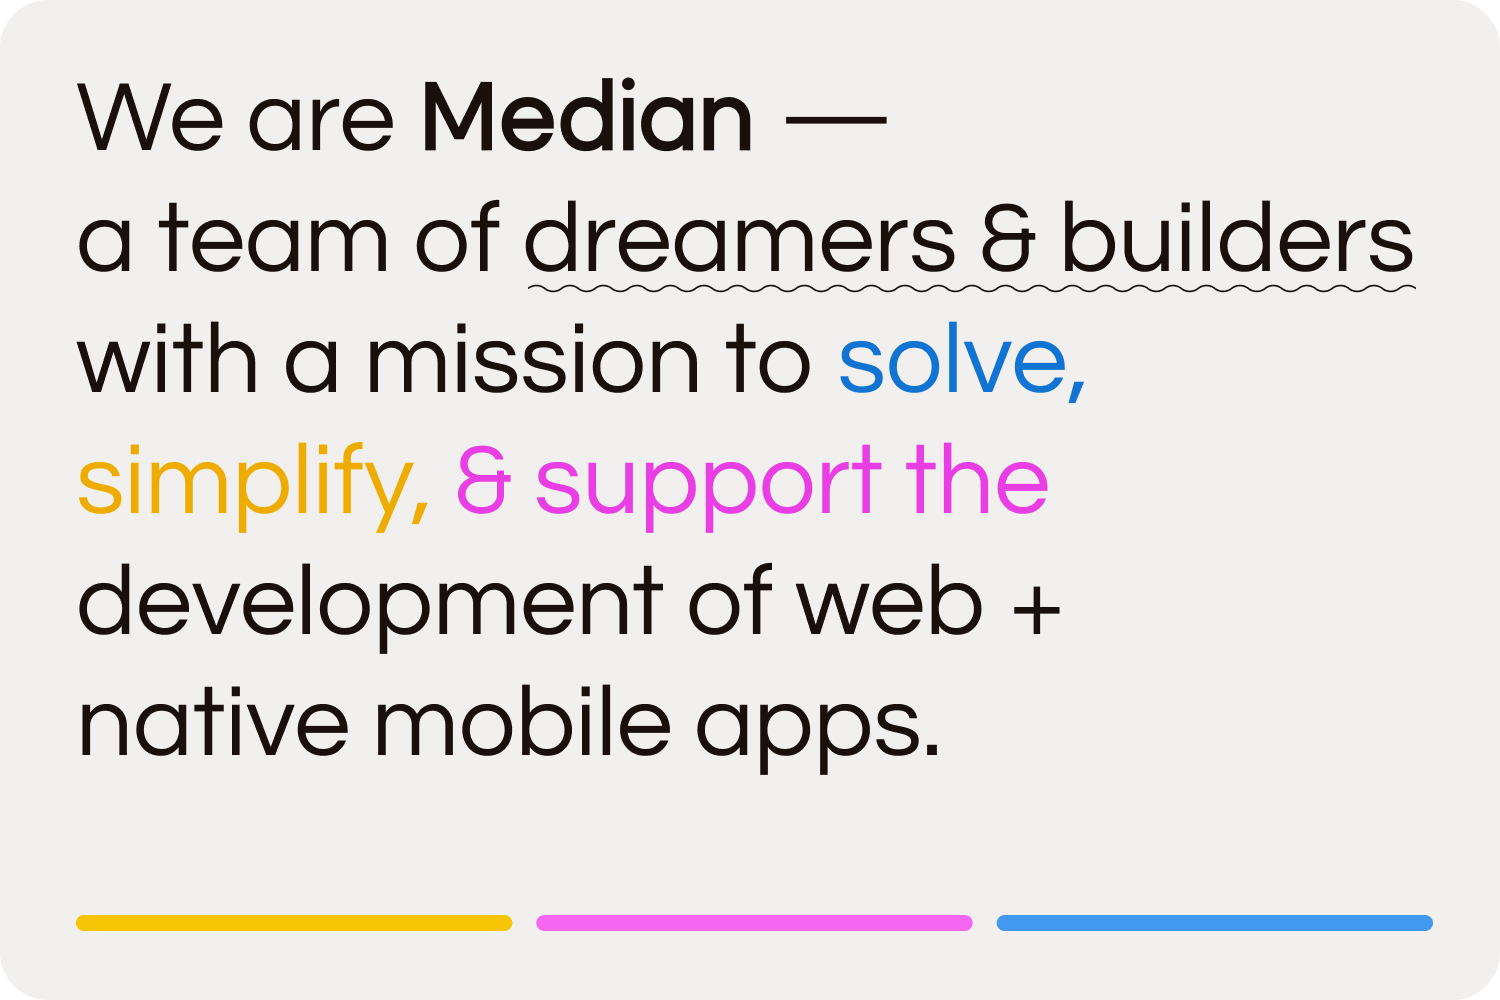 Median.co mission statement: solving, simplifying, and supporting the development of web _ native hybrid mobile apps.